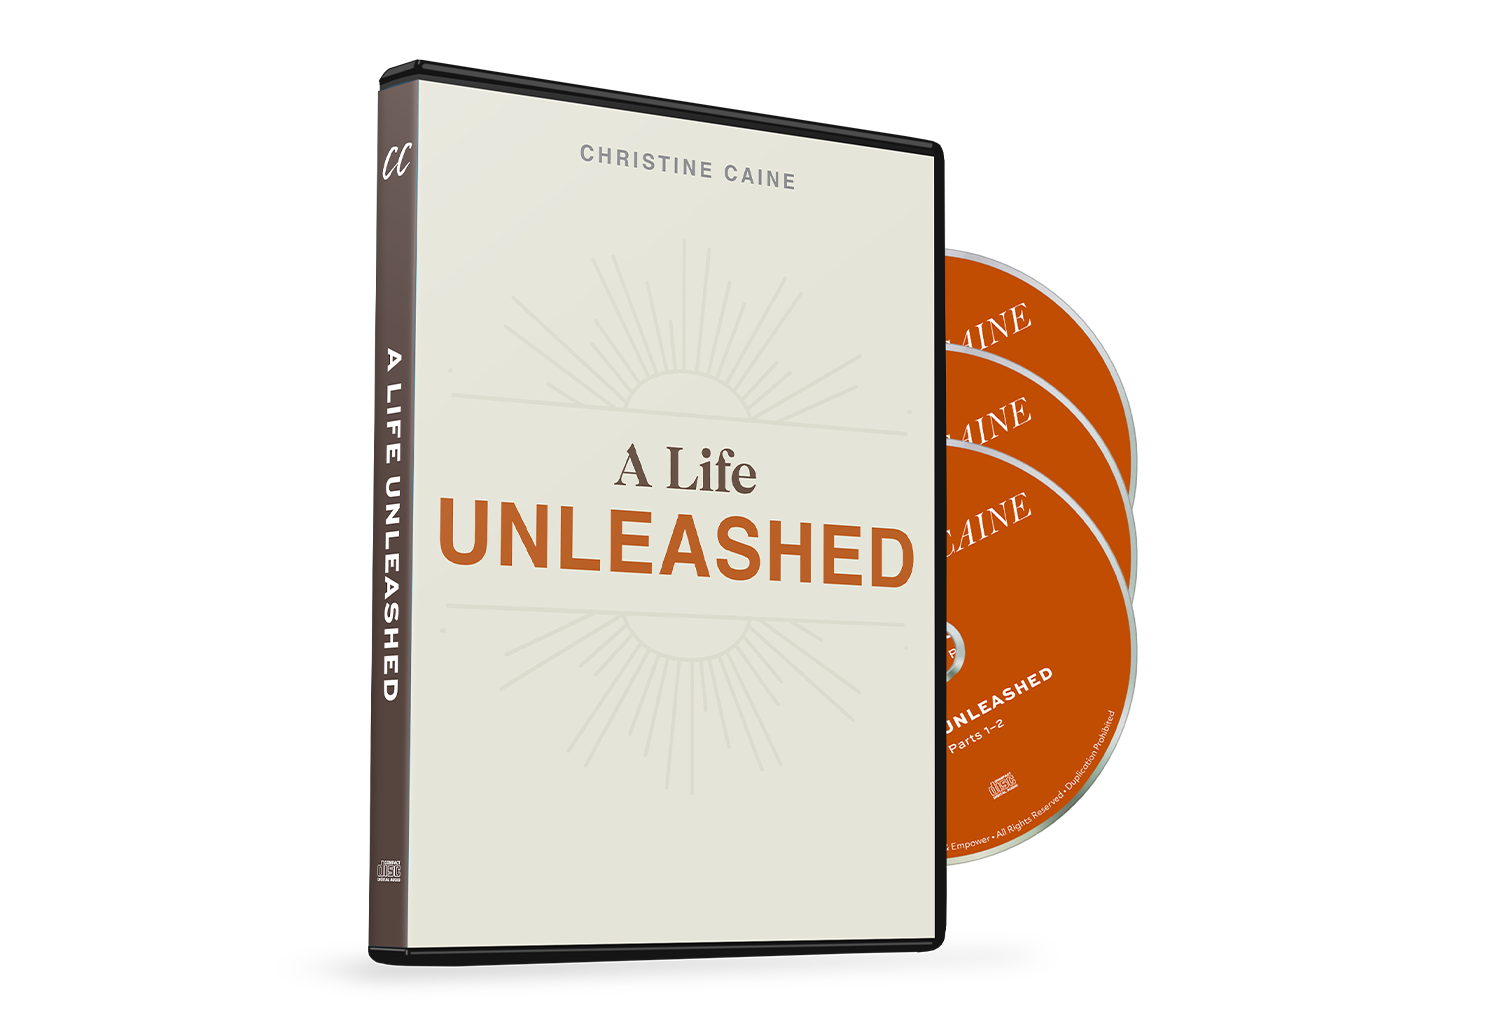 A Life Unleashed by Christine Caine on TBN